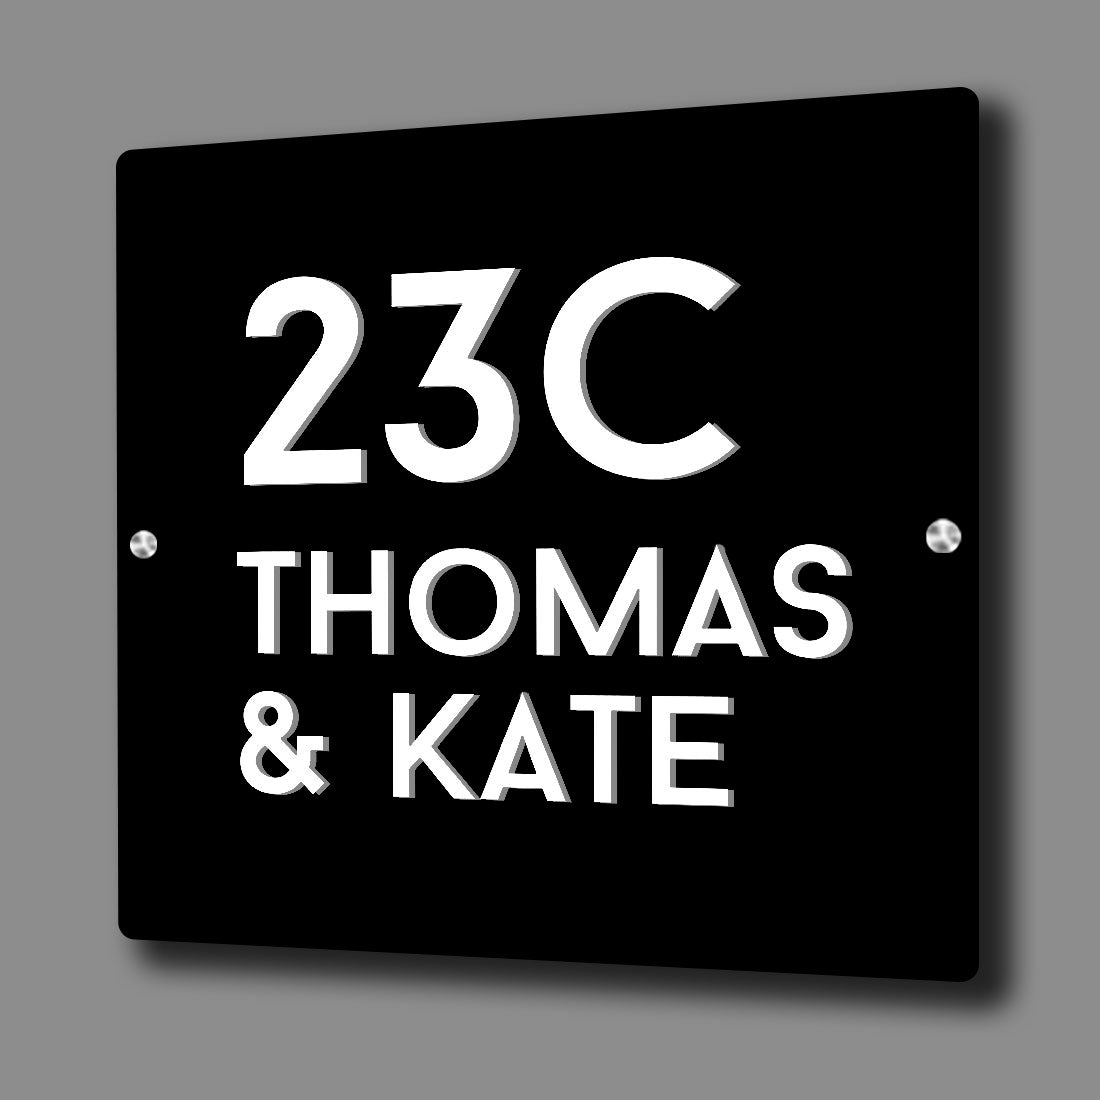 Personalized Metal Name Plate for Office Flat Entrance Outdoor